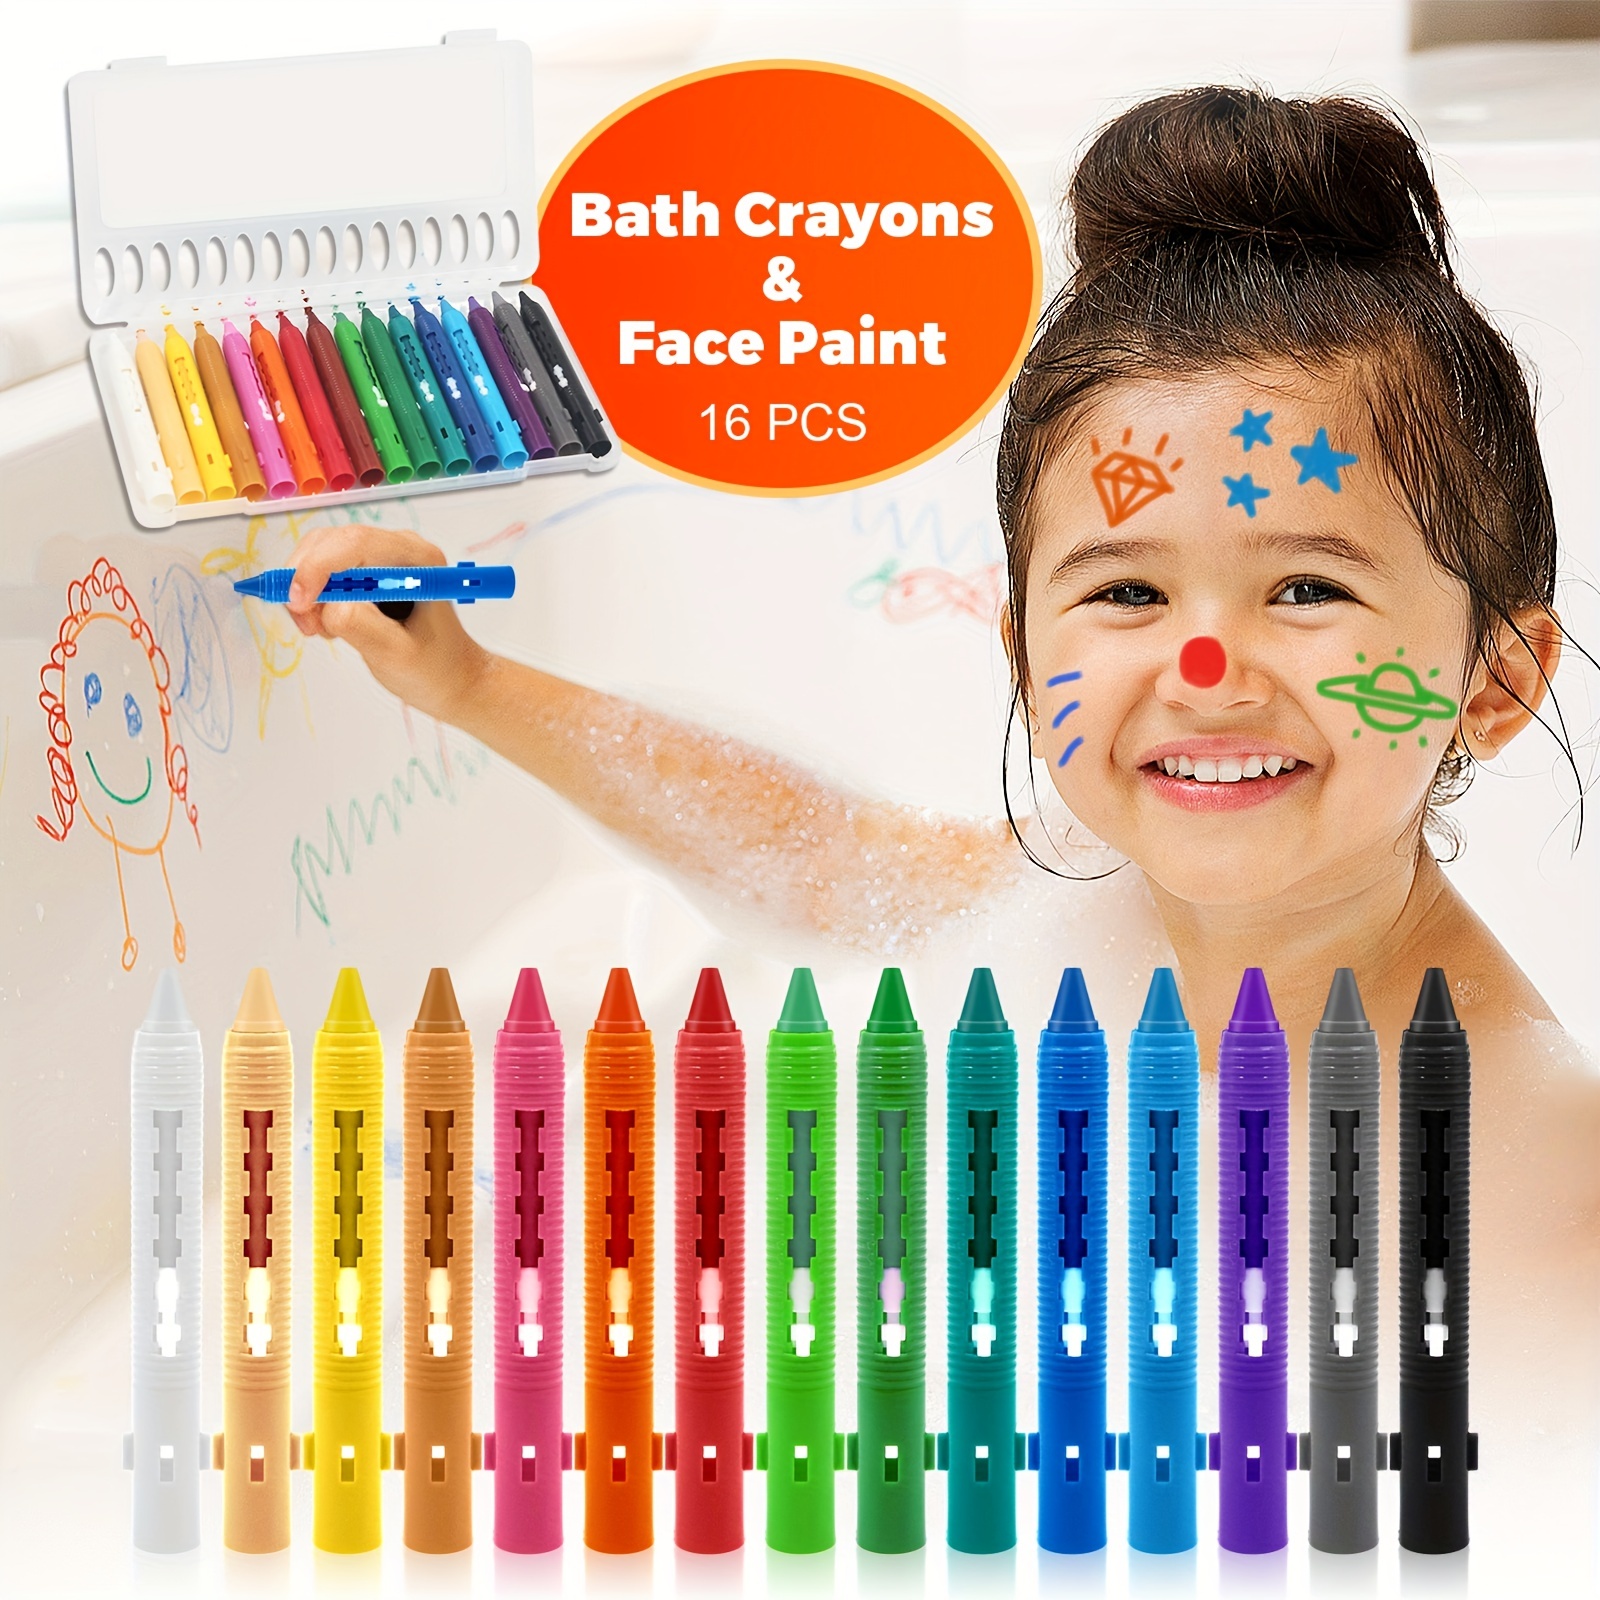  deli Toddler Crayons Rocket Non-Toxic Crayons for Toddlers Age  1 and Older Washable Crayons Painting Drawing & Art Supplies,12 Packs  Crayons (12) : Toys & Games